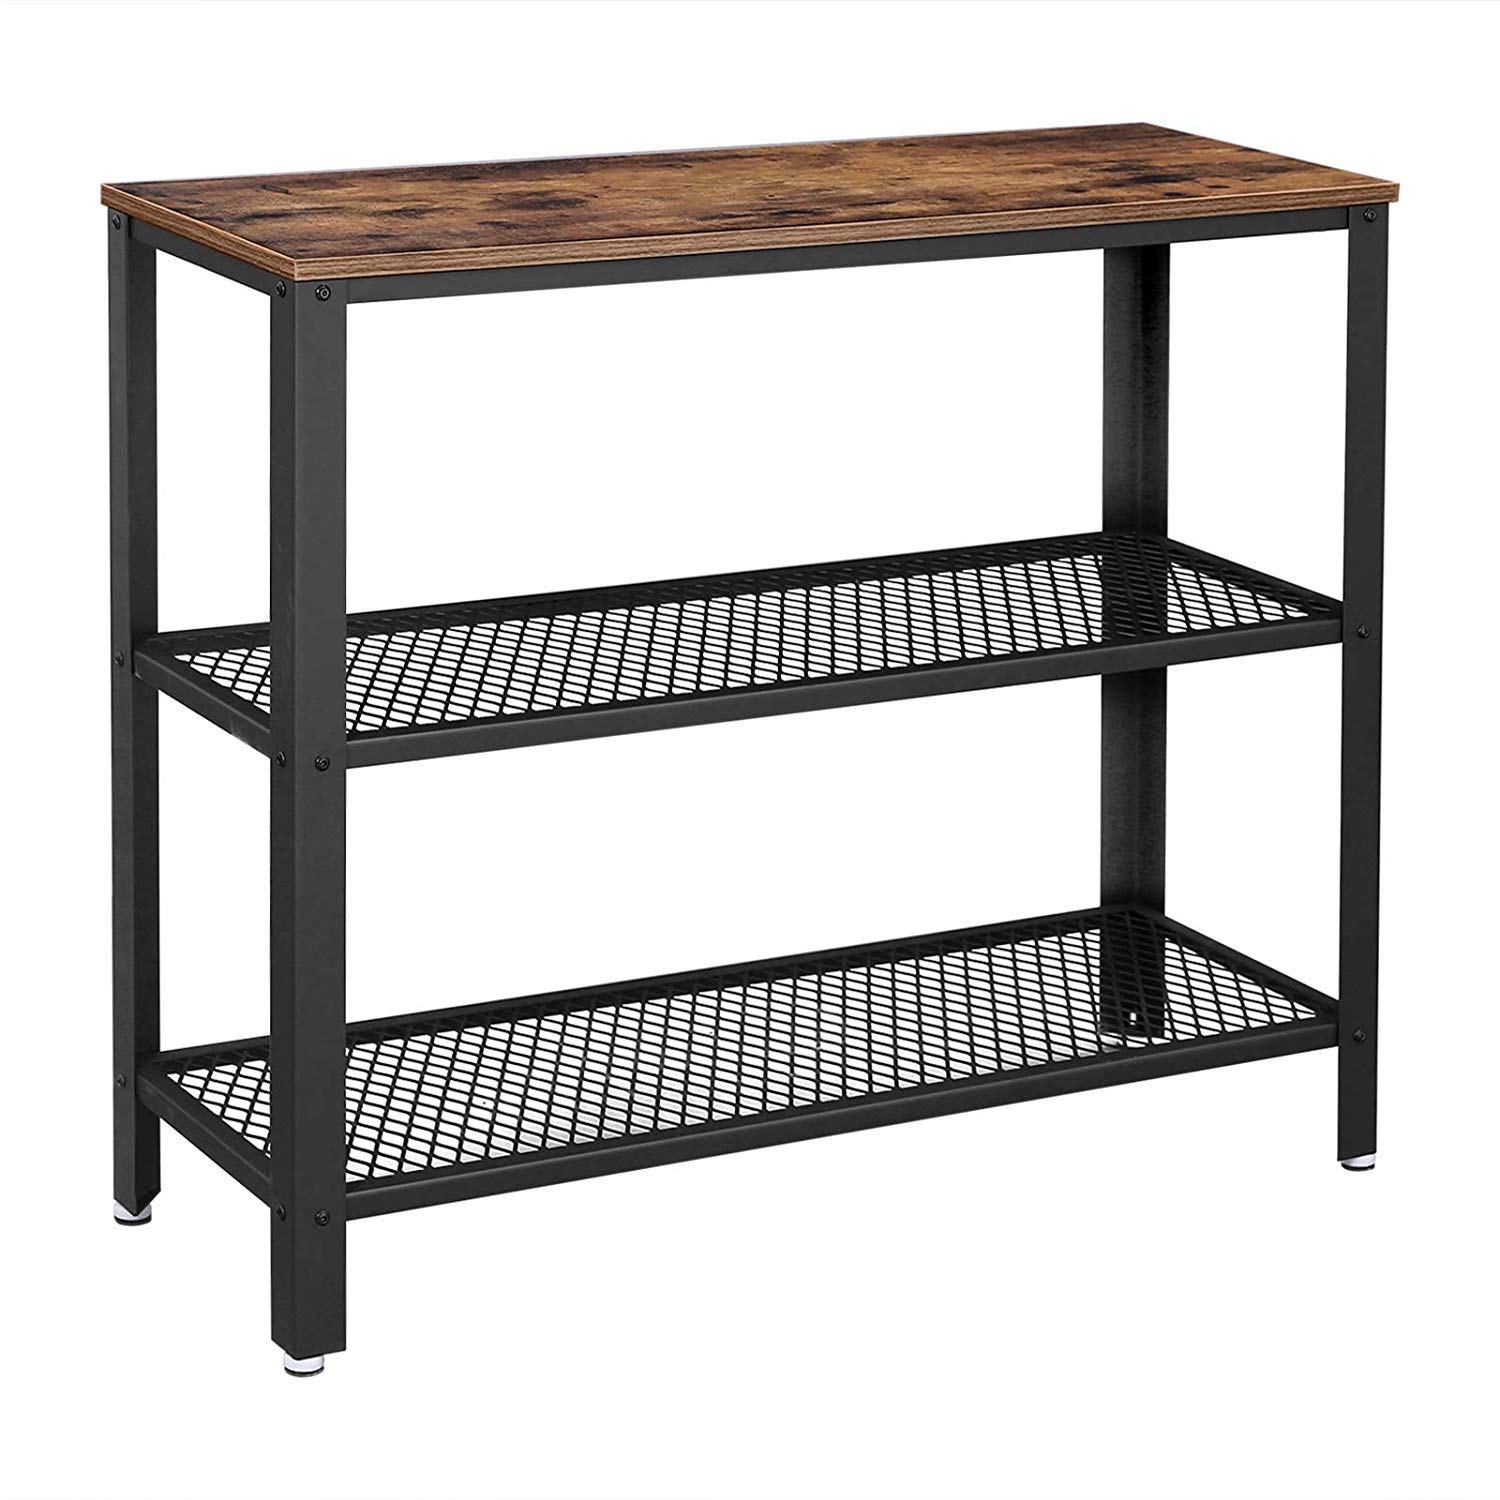 

Industrial Console Table Hallway Table with 2 Mesh Storage Shelves Side Table Bookshelf Sideboard for Home Living Room Corridor Office